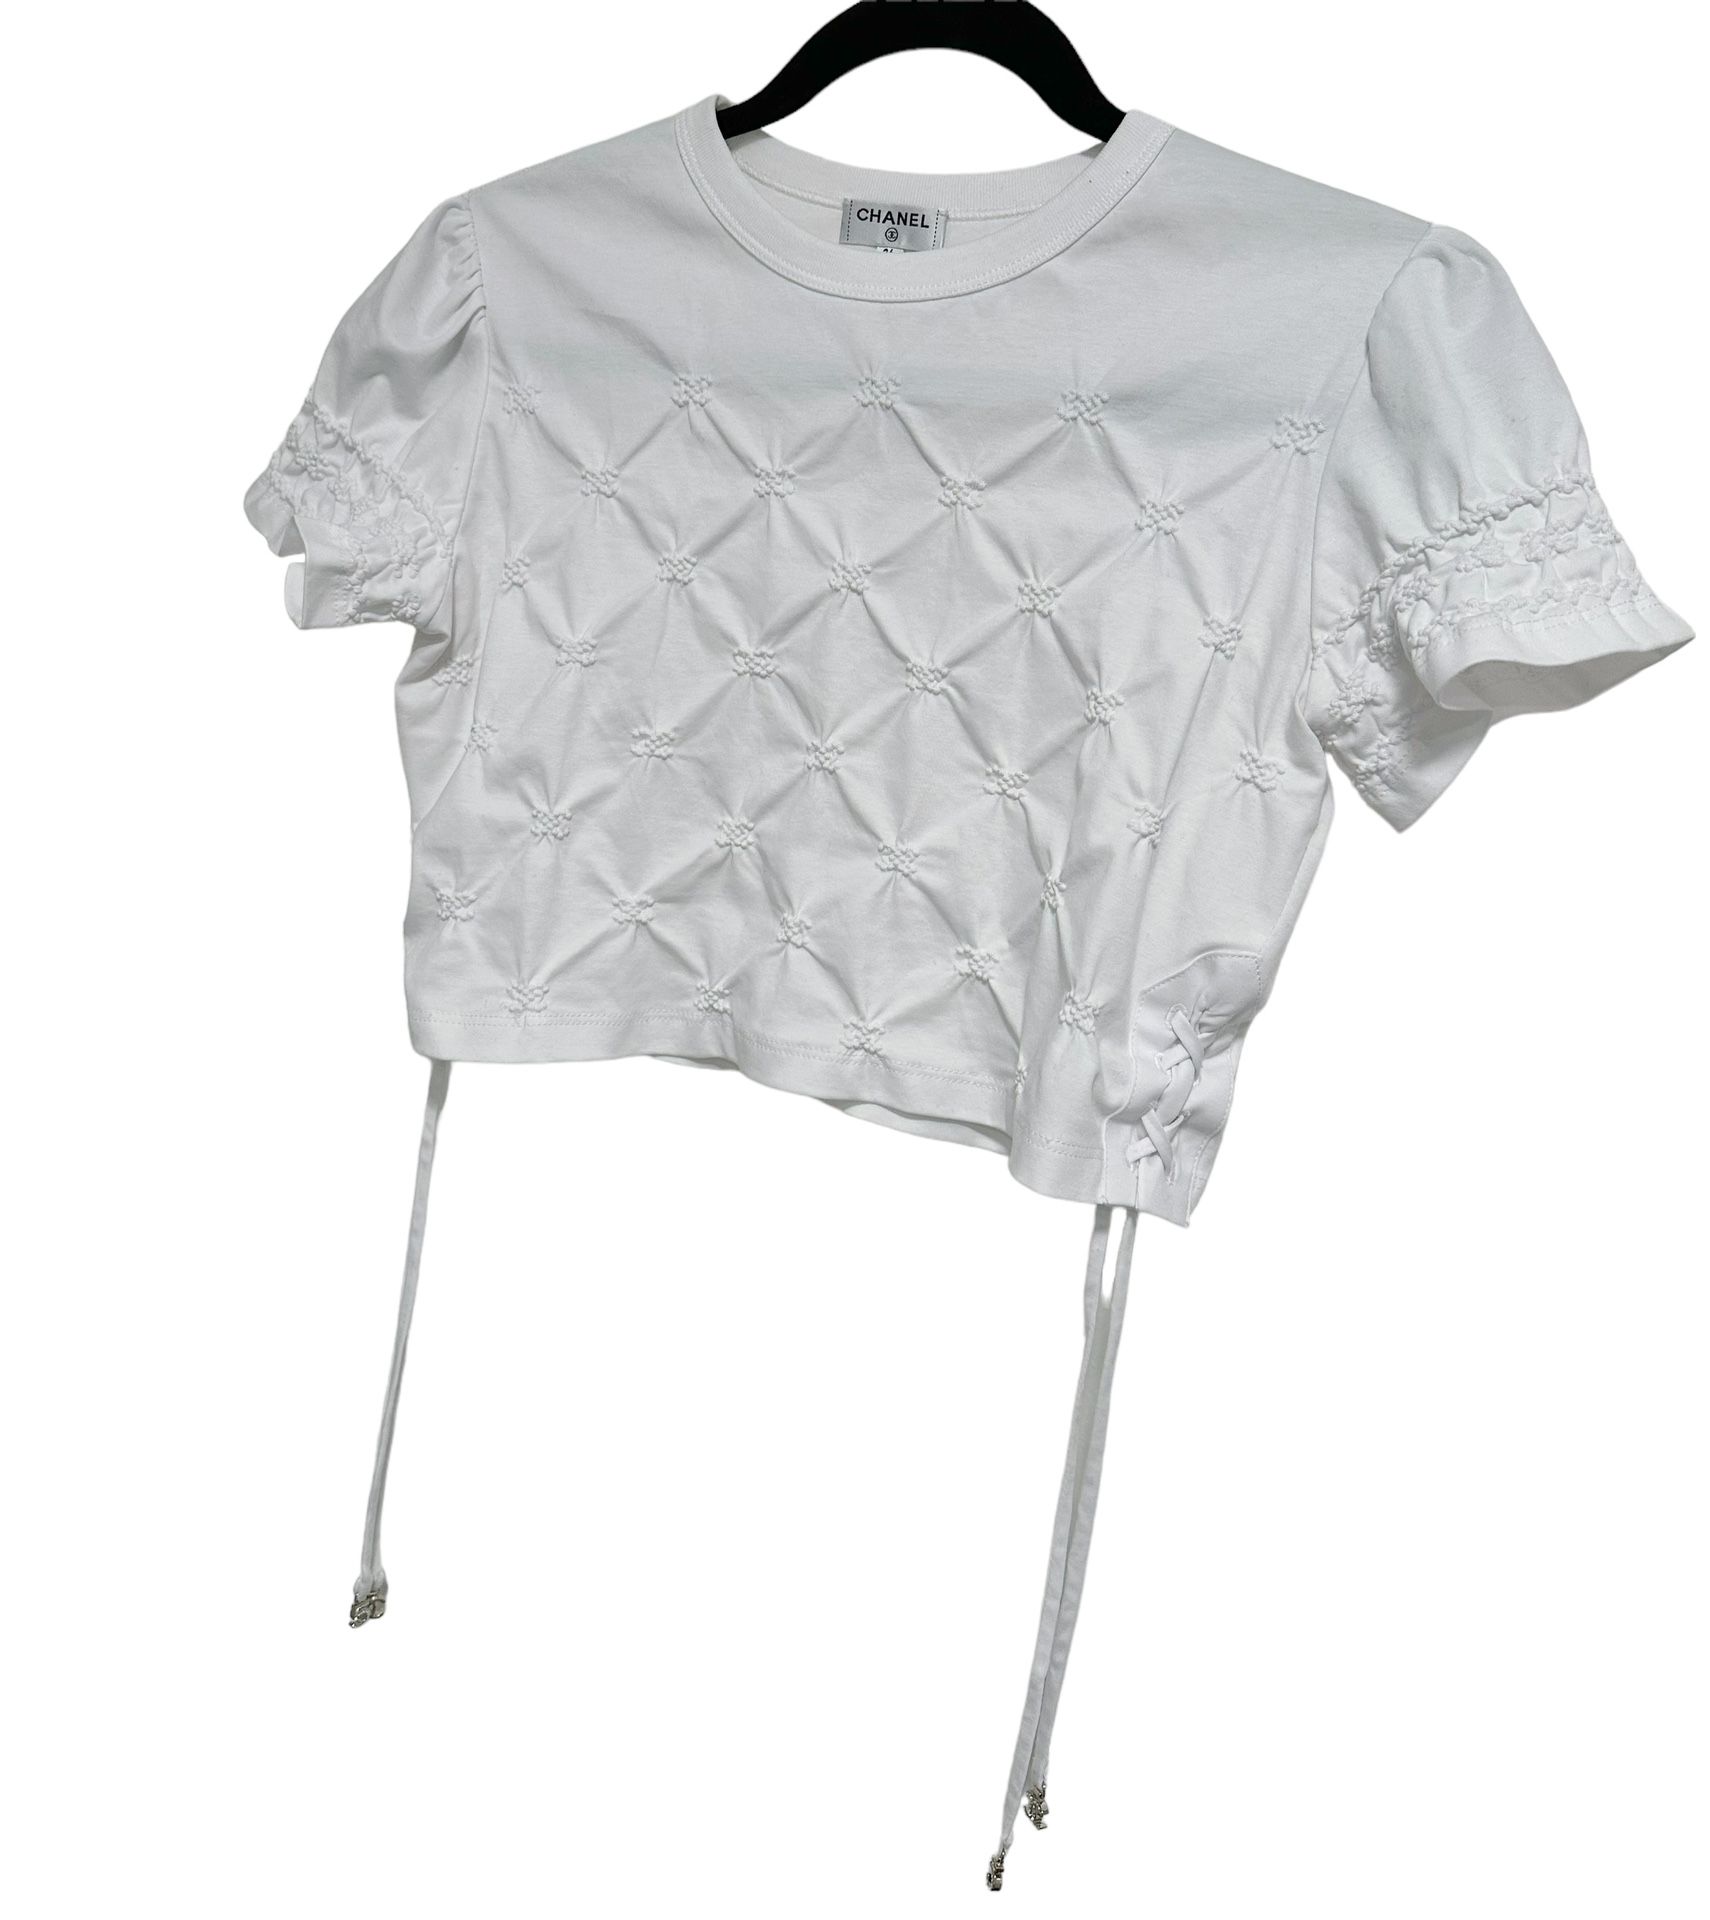 Chanel Cropped Shirt - 20 For Sale on 1stDibs